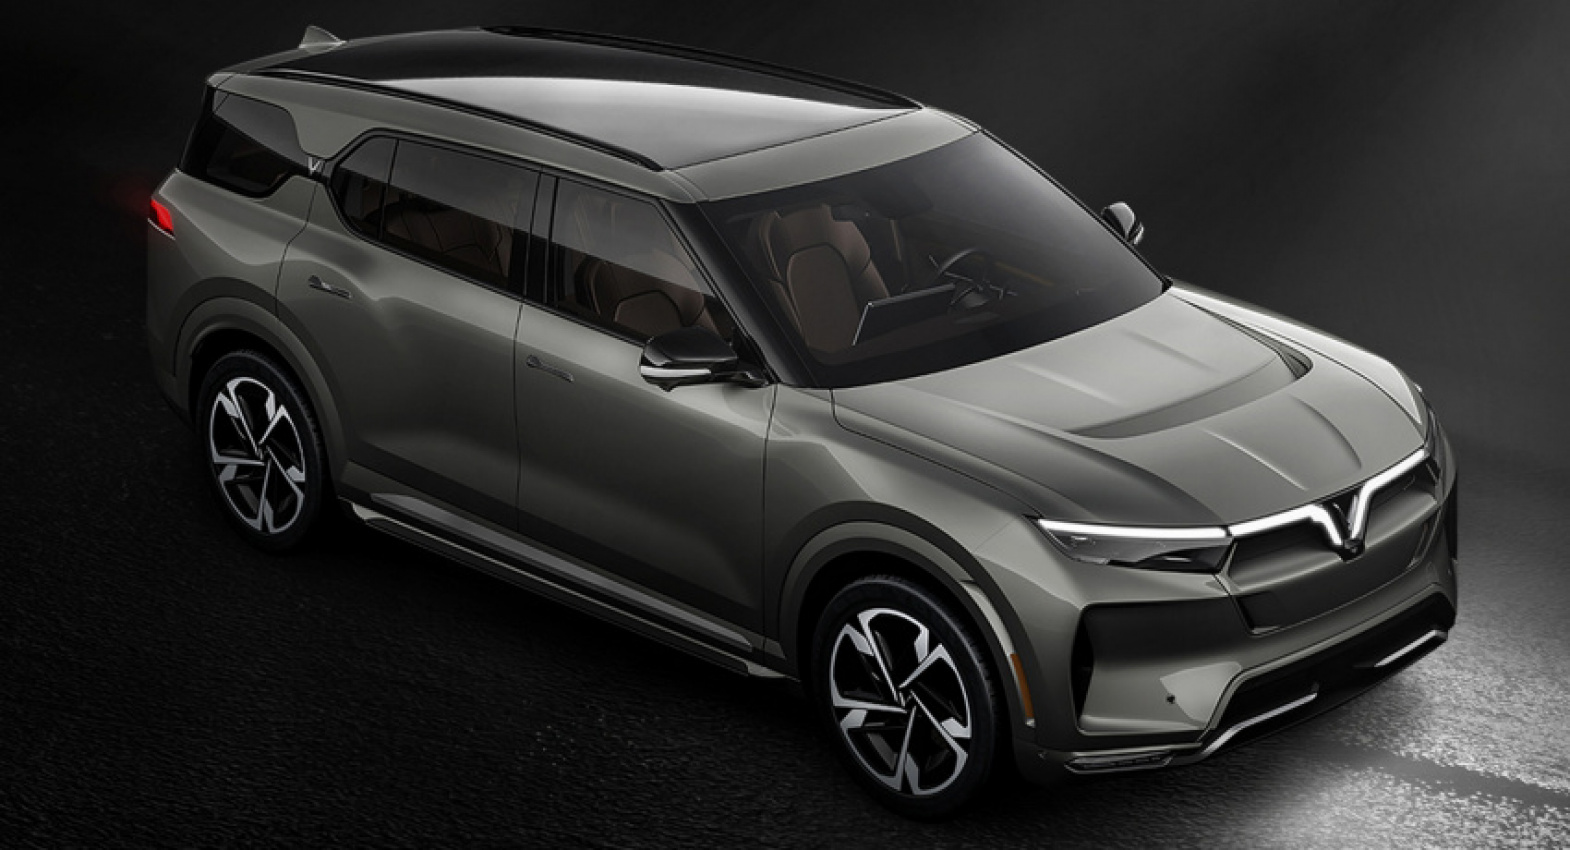 autos, cars, hp, news, vinfast, new cars, vinfast vf e35, vinfast vf e36, vinfast and pininfarina vf 8 and vf 9 electric suvs will have up to 402 hp, 300+ mile range